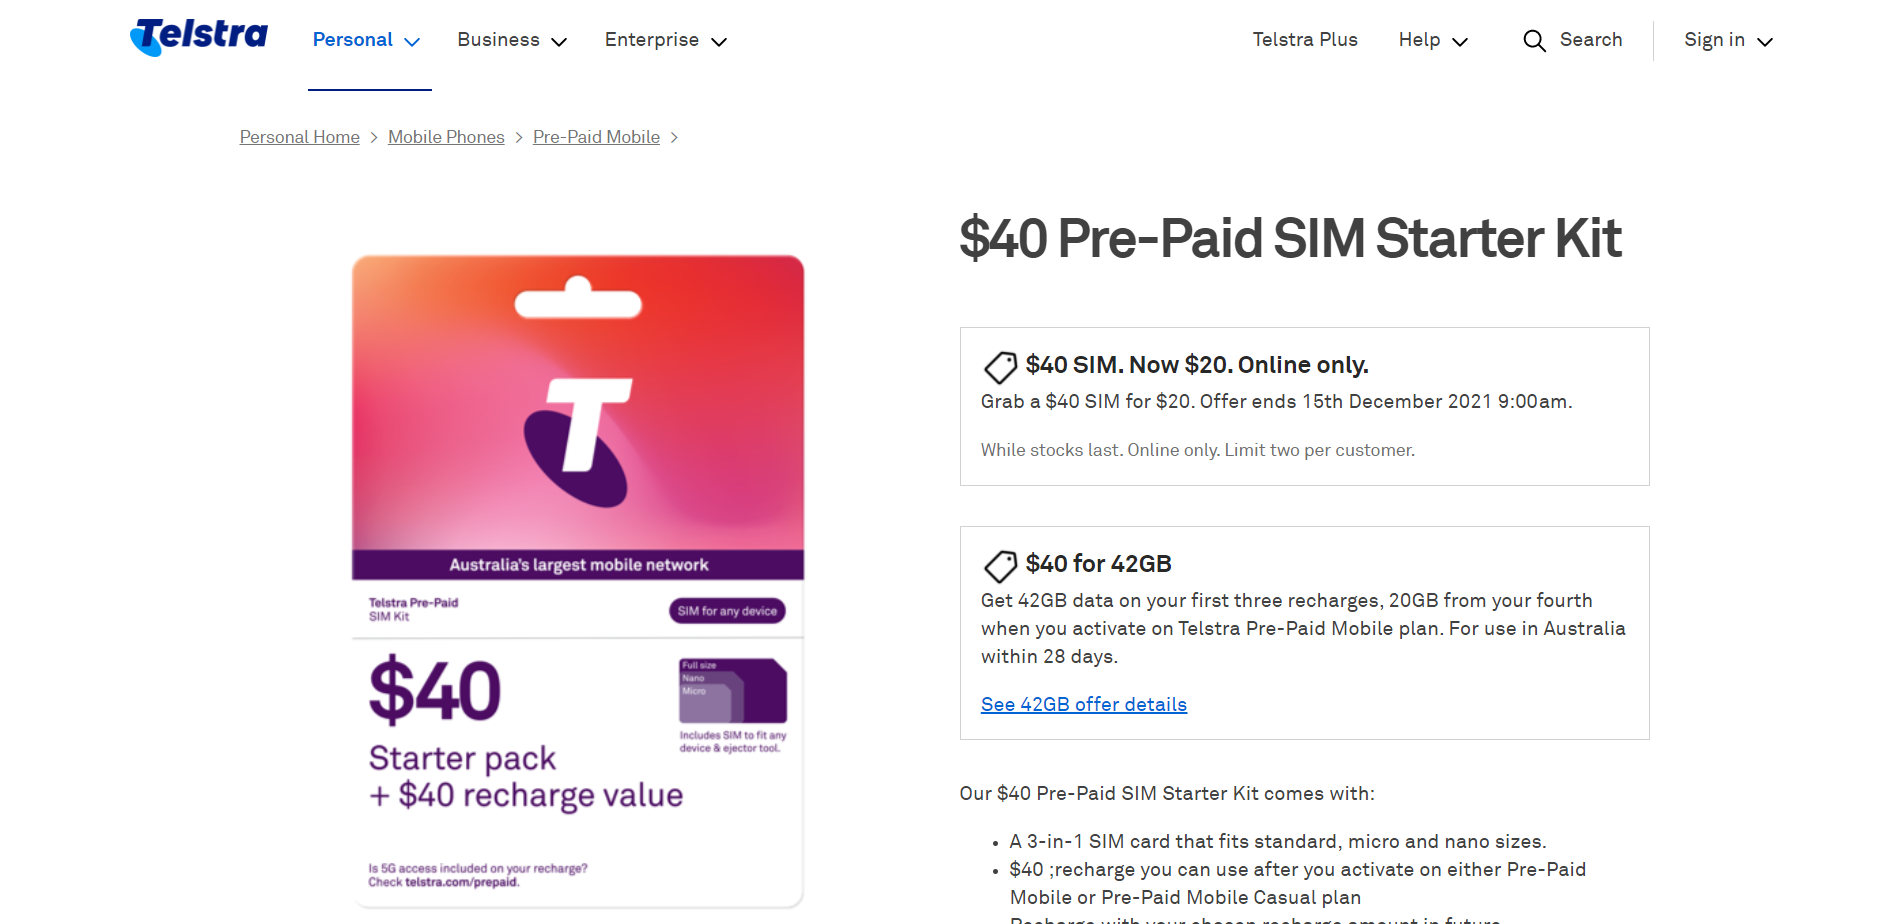 50% OFF on $40 Pre-Paid SIM Starter Kit now $20 for new customers